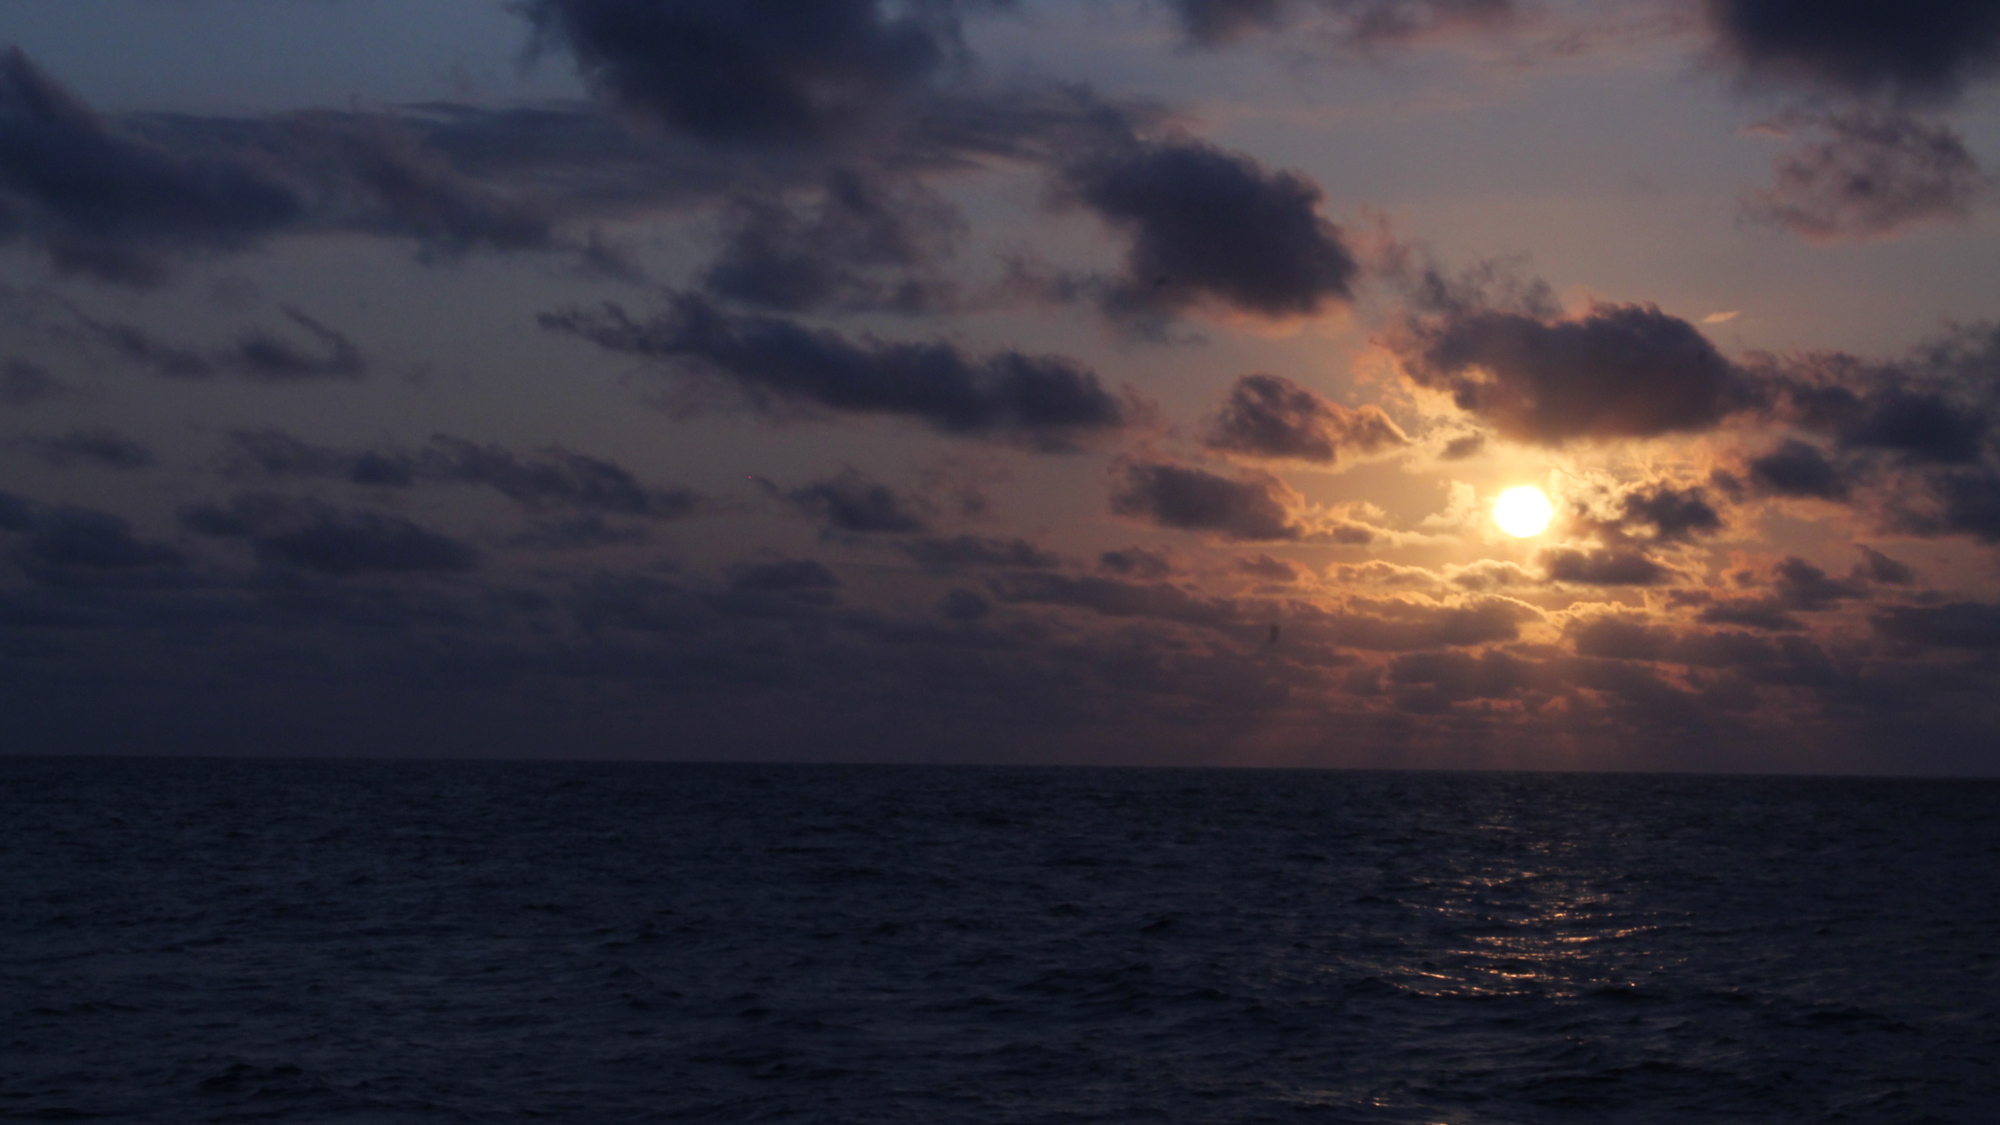 Crossing the tropical Atlantic, on the hunt for zooplankton